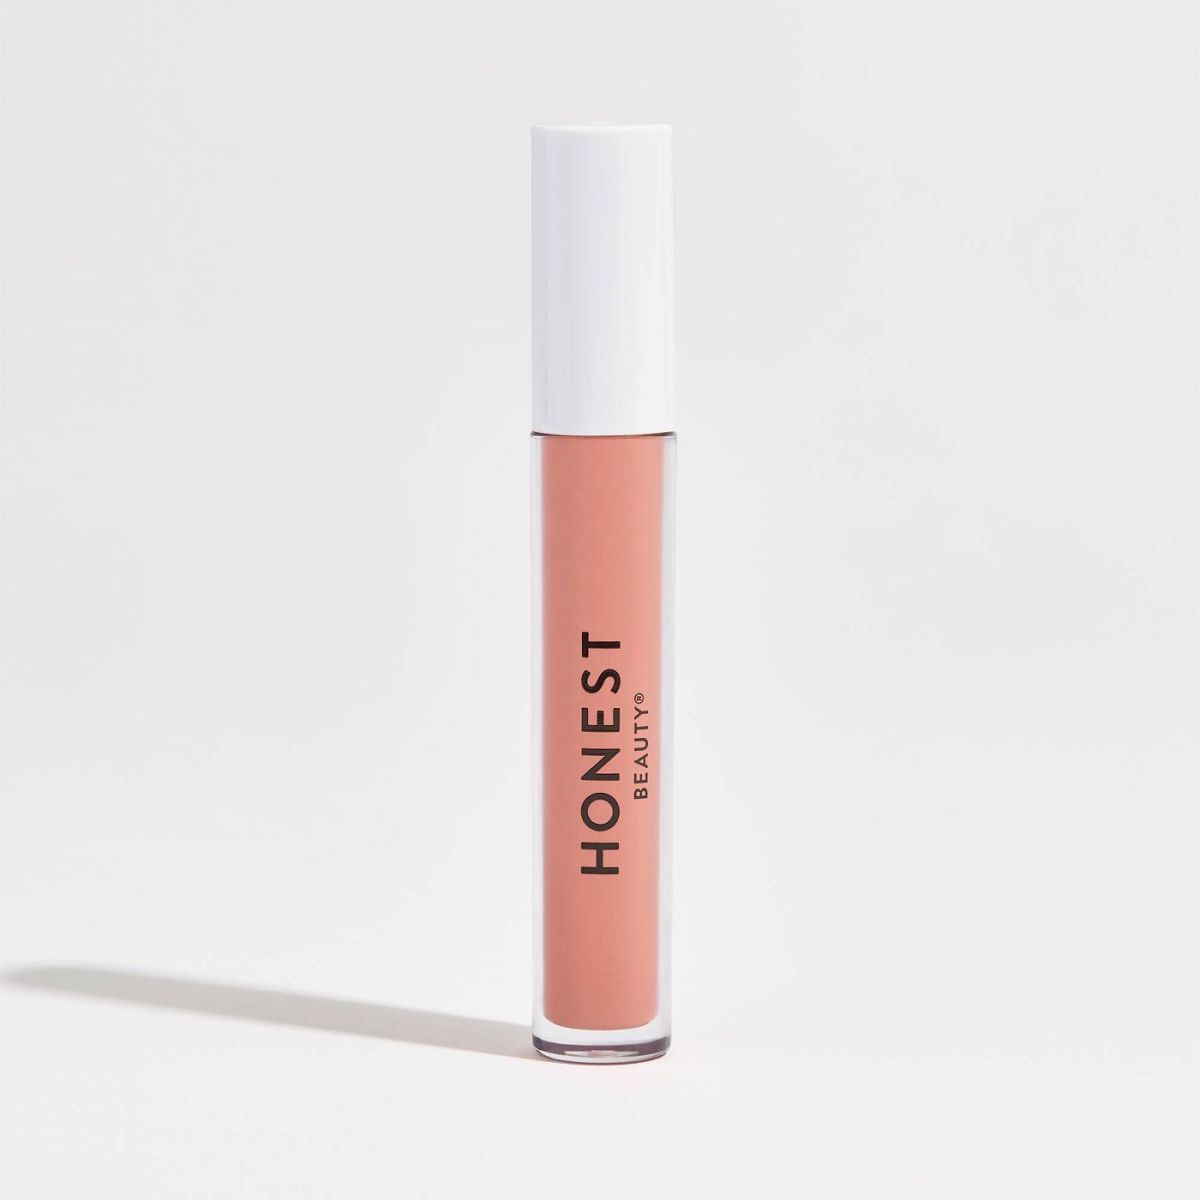 Honest Beauty Liquid Lipstick in BFF, $12.99, available here. Photo: Courtesy of Honest Beauty